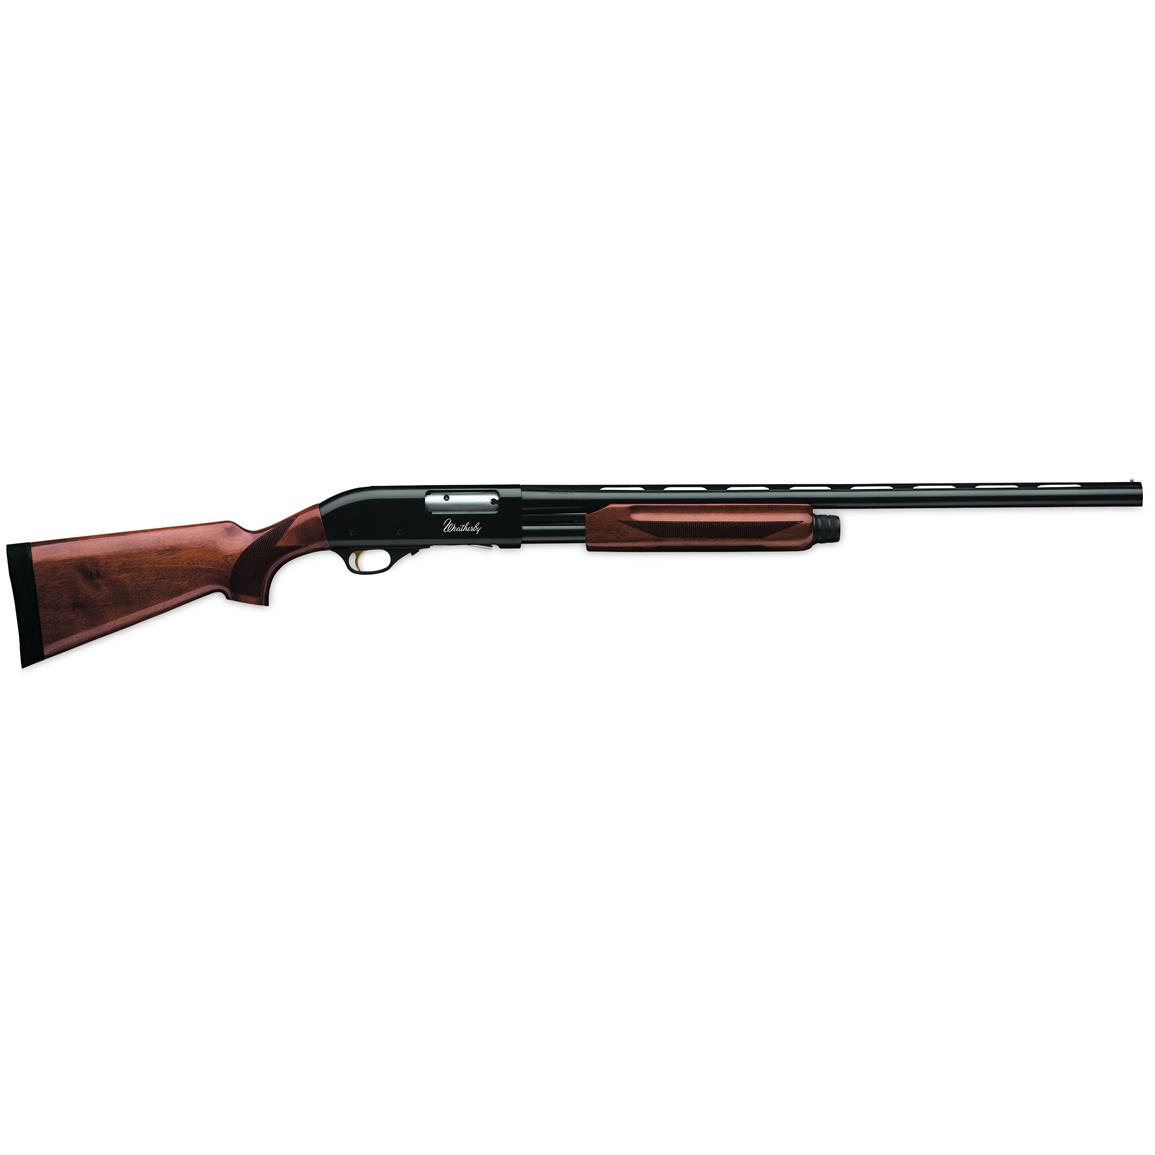 Weatherby PA-08 Upland, Pump Action, 12 Gauge, 26" Barrel, 4+1 Rounds